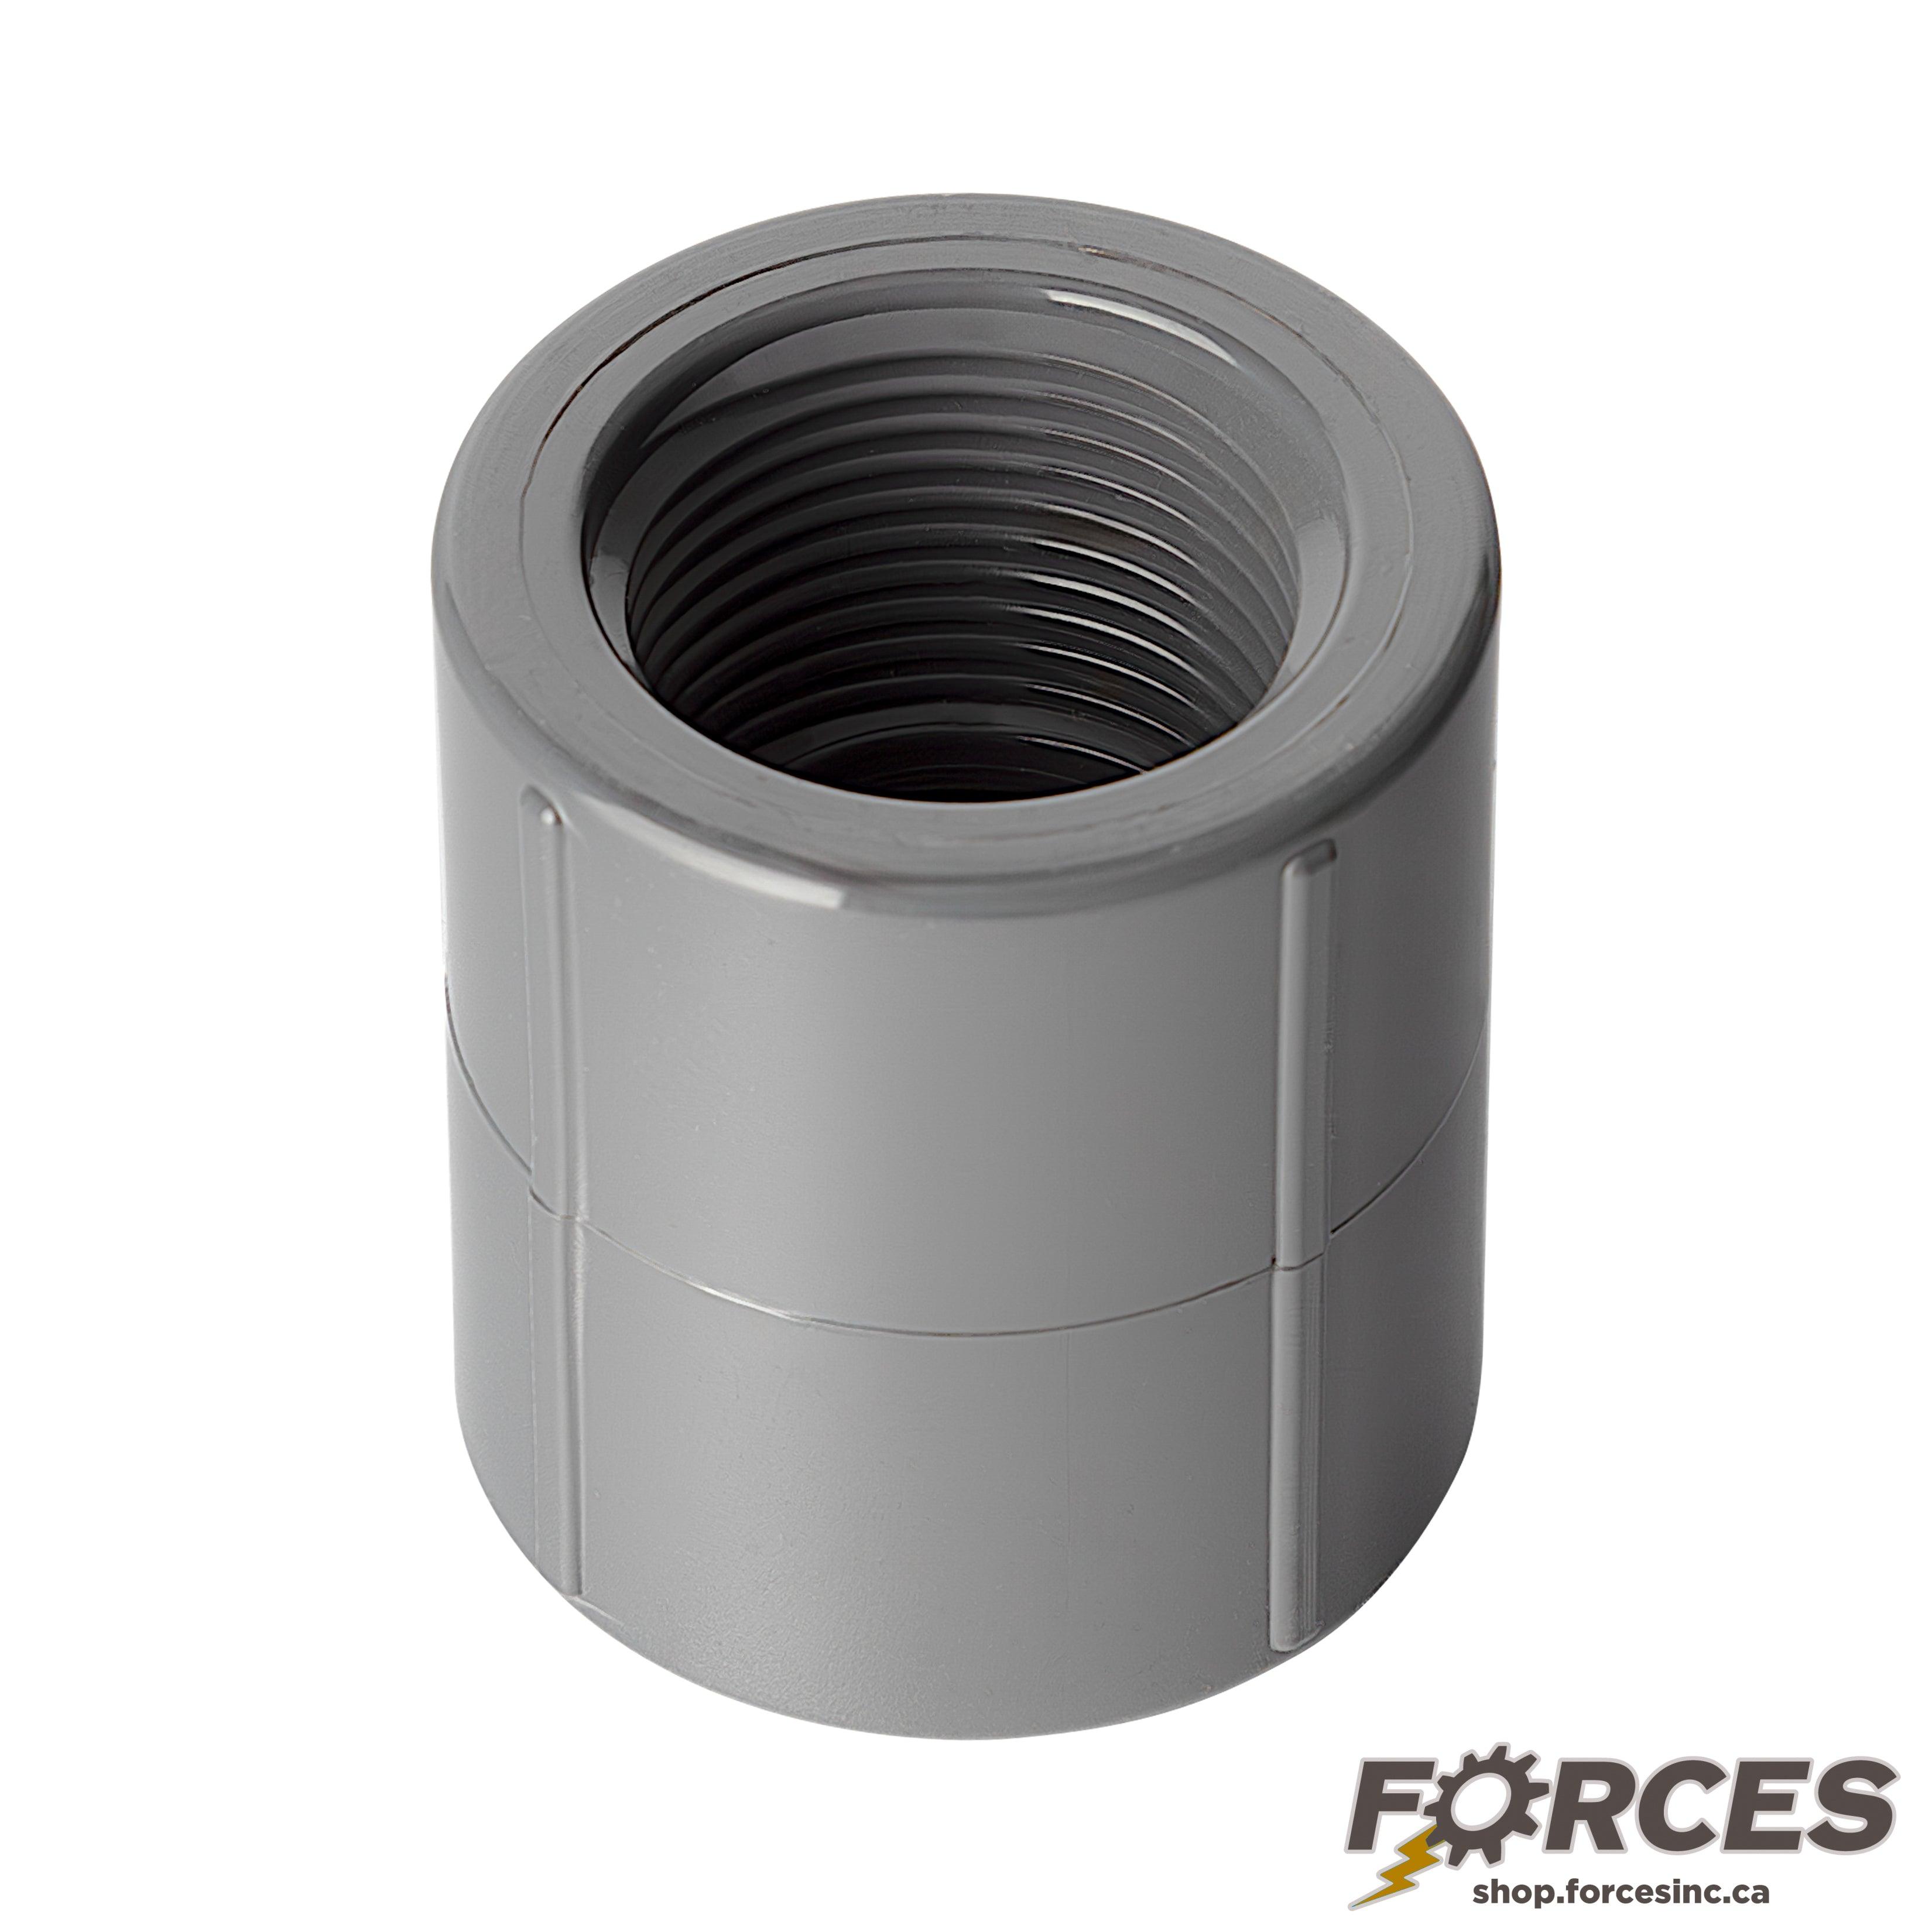 1/4" Coupling (Threaded) Sch 80 - PVC Grey | 830002 - Forces Inc